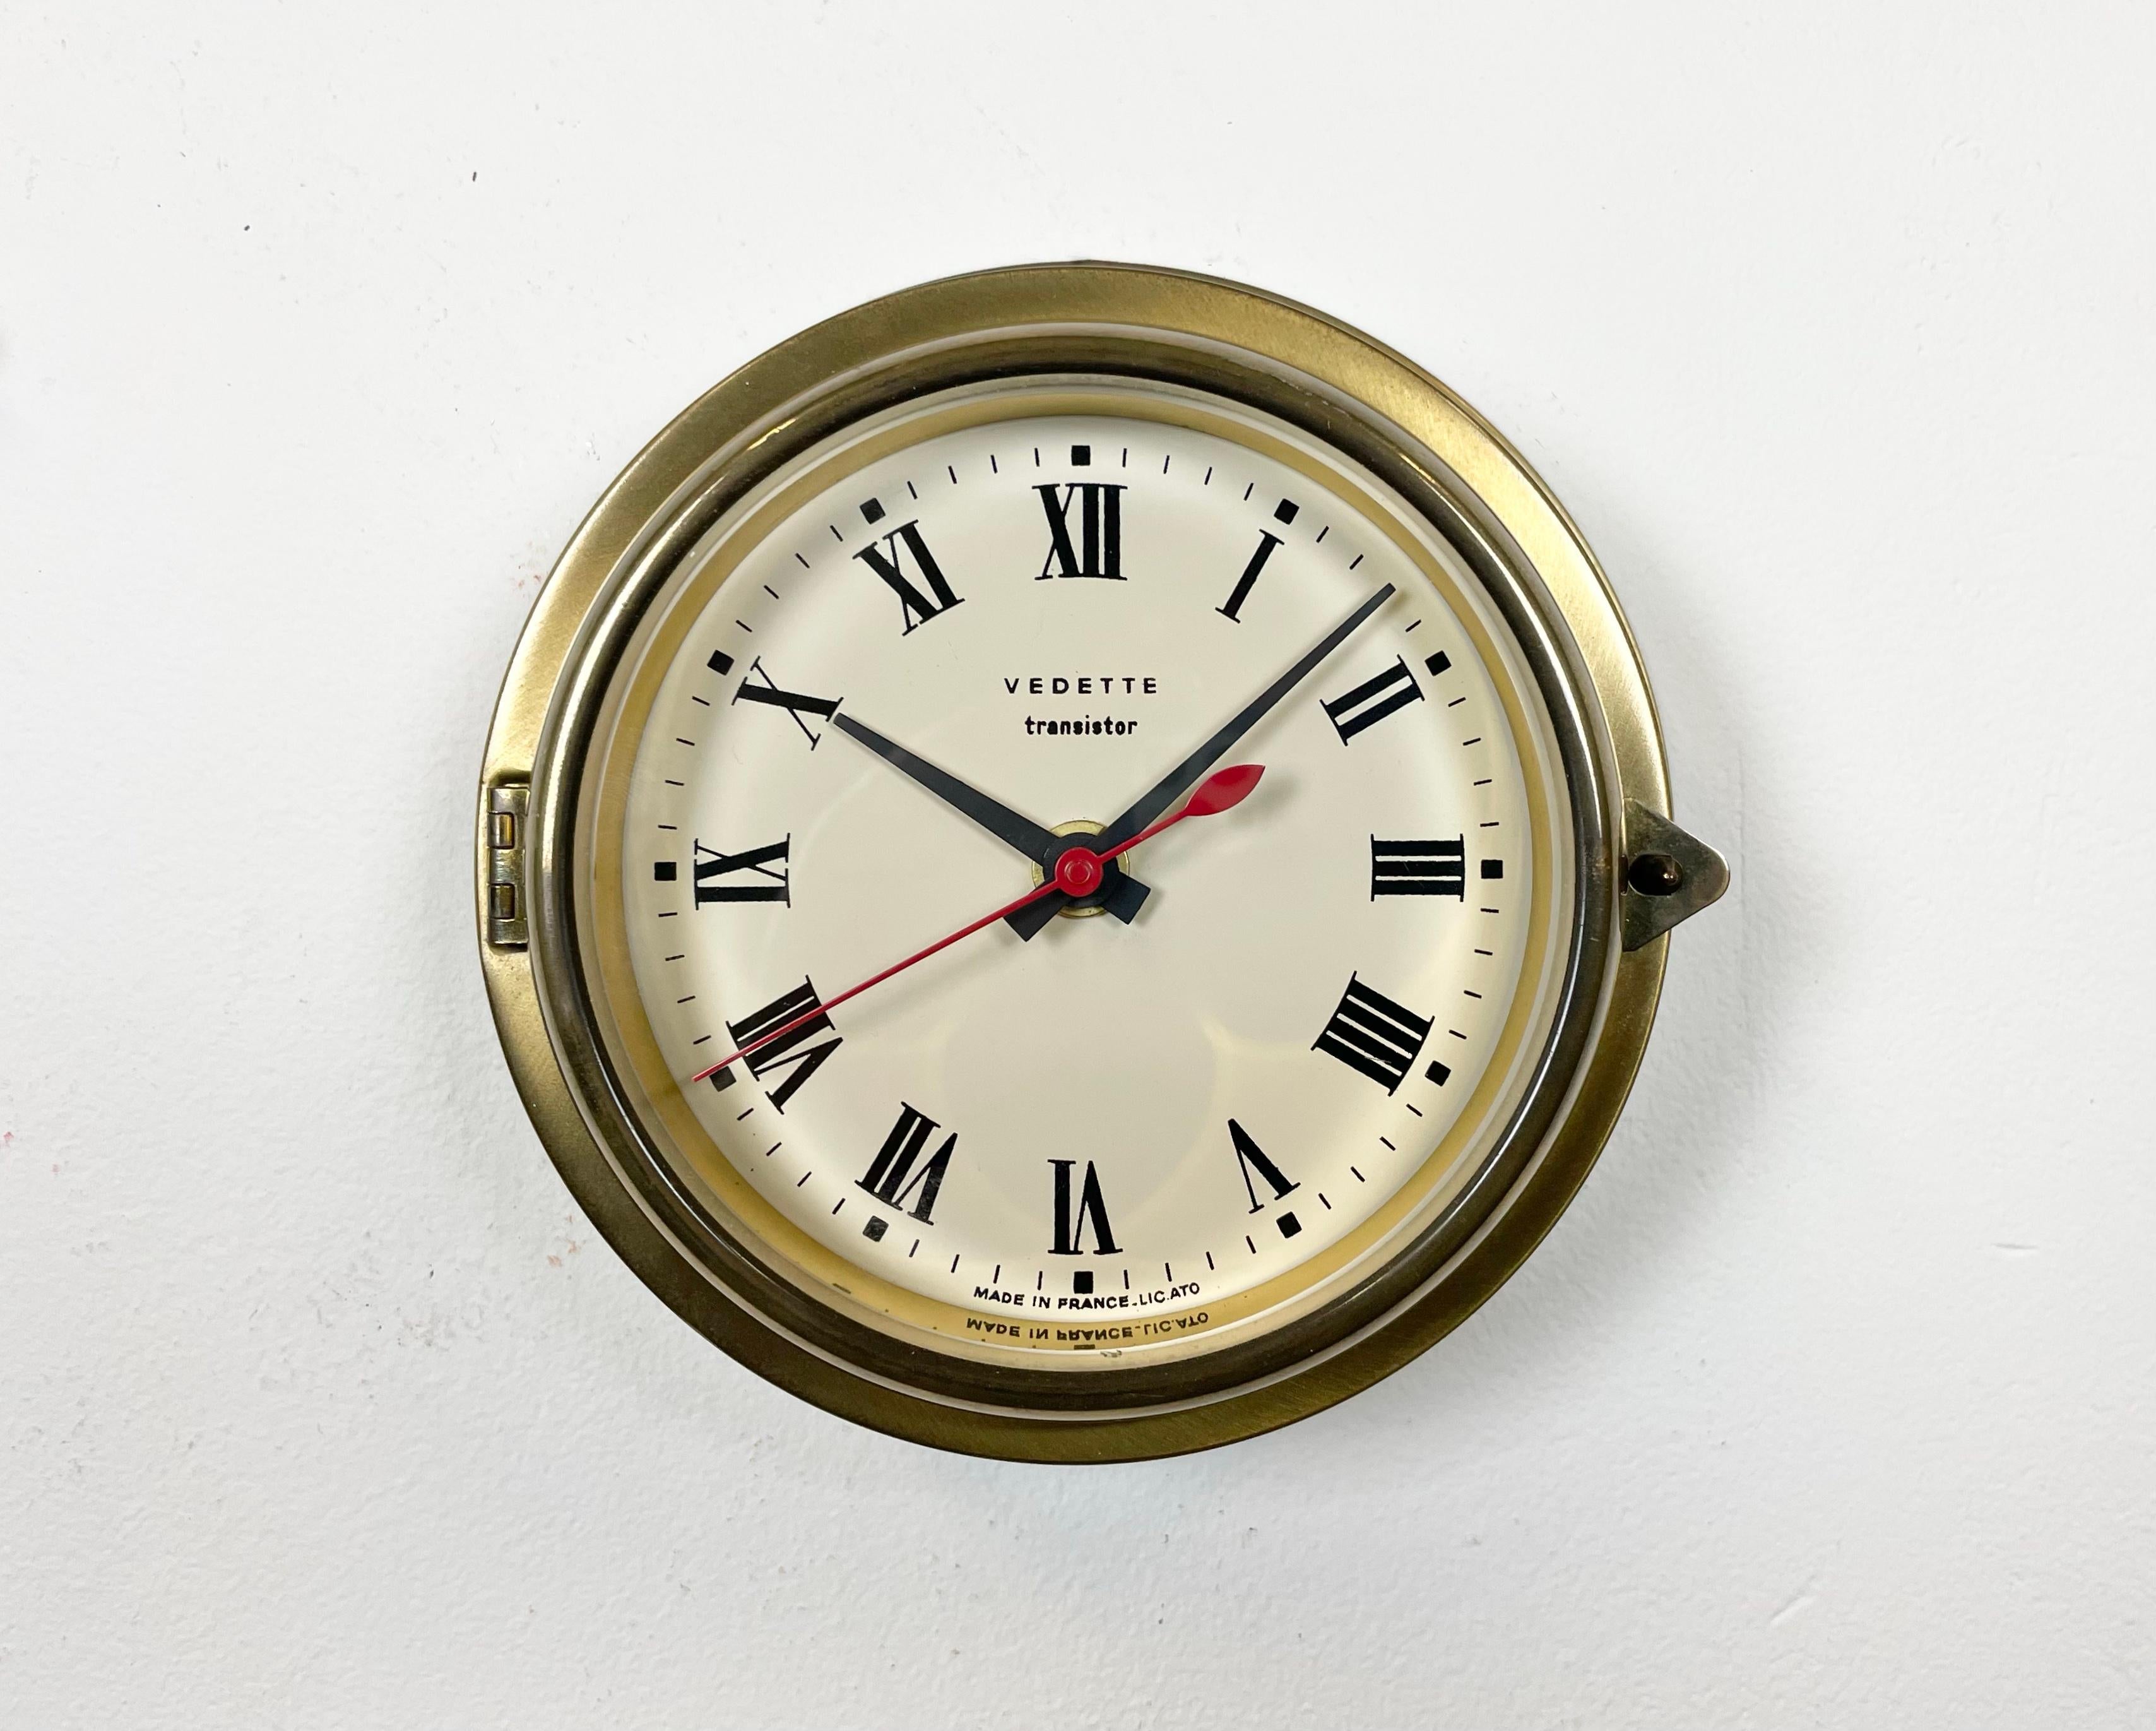 Vintage ships clock made by Vedette in France during the 1950s.It features a brass body frame, plastic dial and clear glass cover. This item has been converted into a battery-powered clockwork and works on just 1 x AA battery.